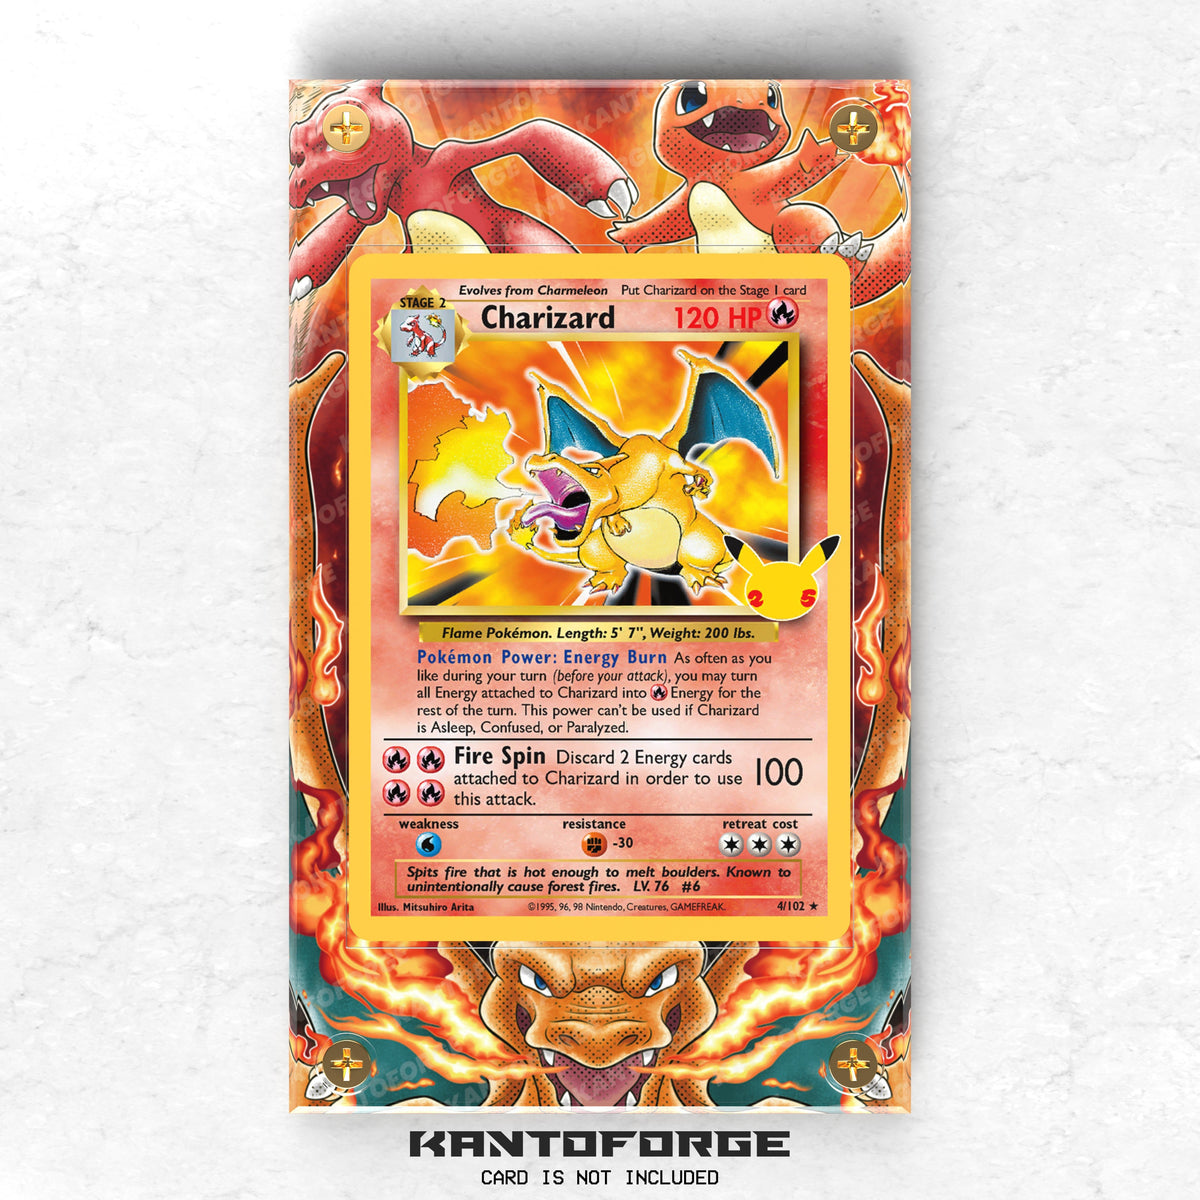 Charizard (リザードン) Base Set - Pokémon Extended Artwork Protective Card Display Case